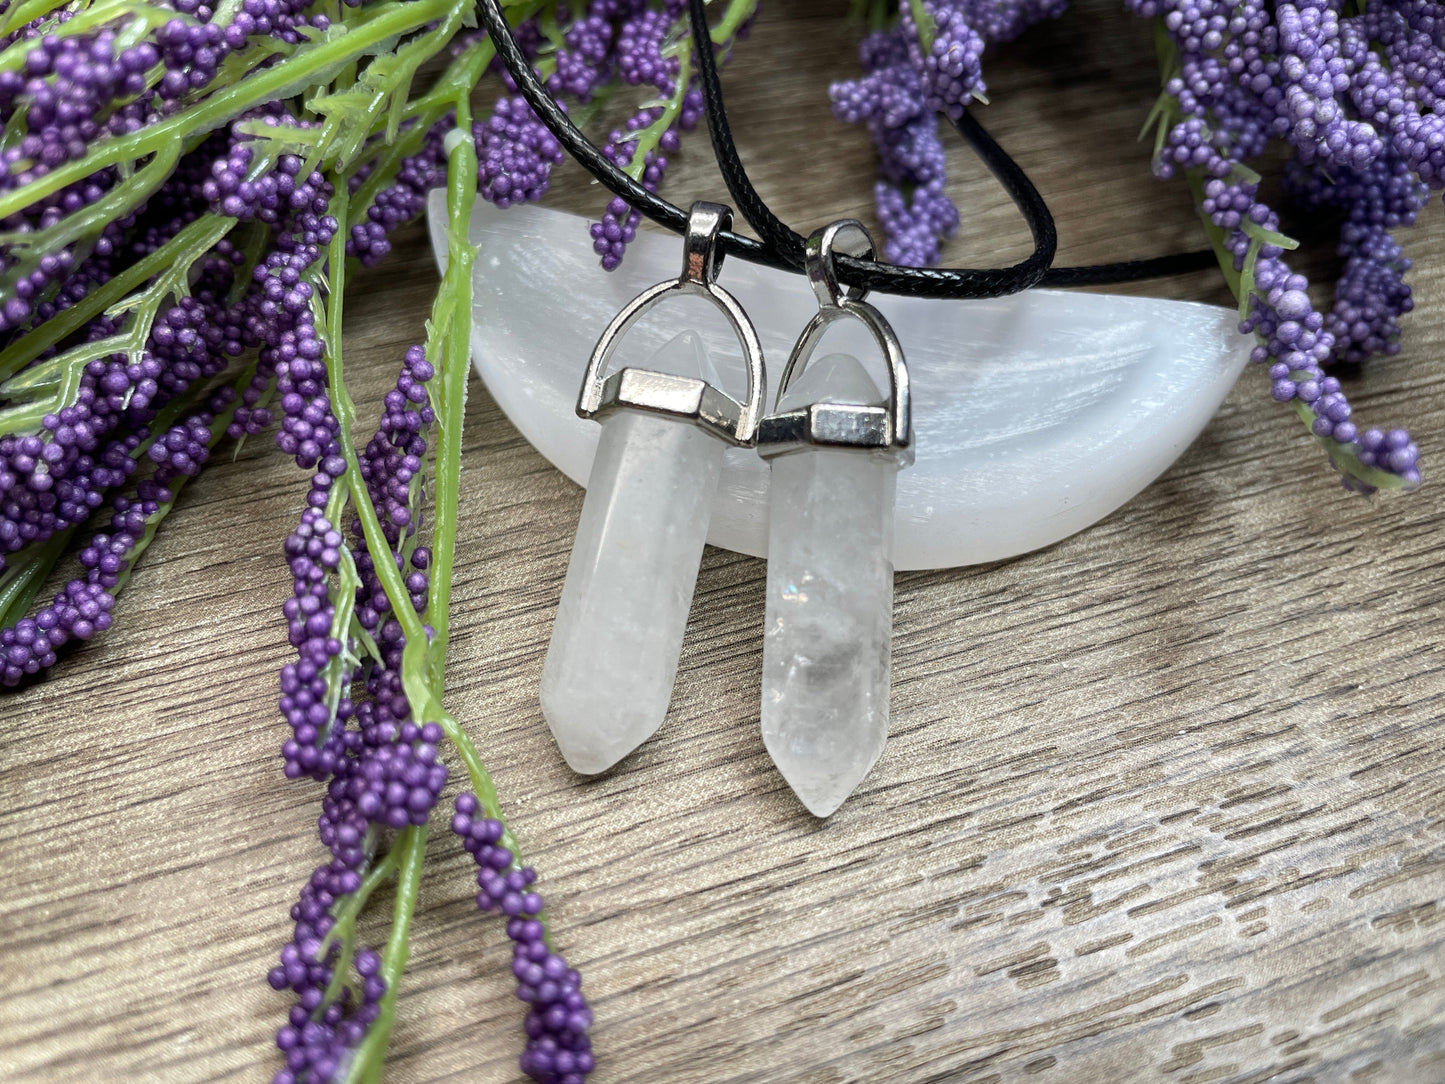 An image of clear quartz double-terminated polished crystal necklaces sitting on selenite and surrounded by lavender on a wood surface..